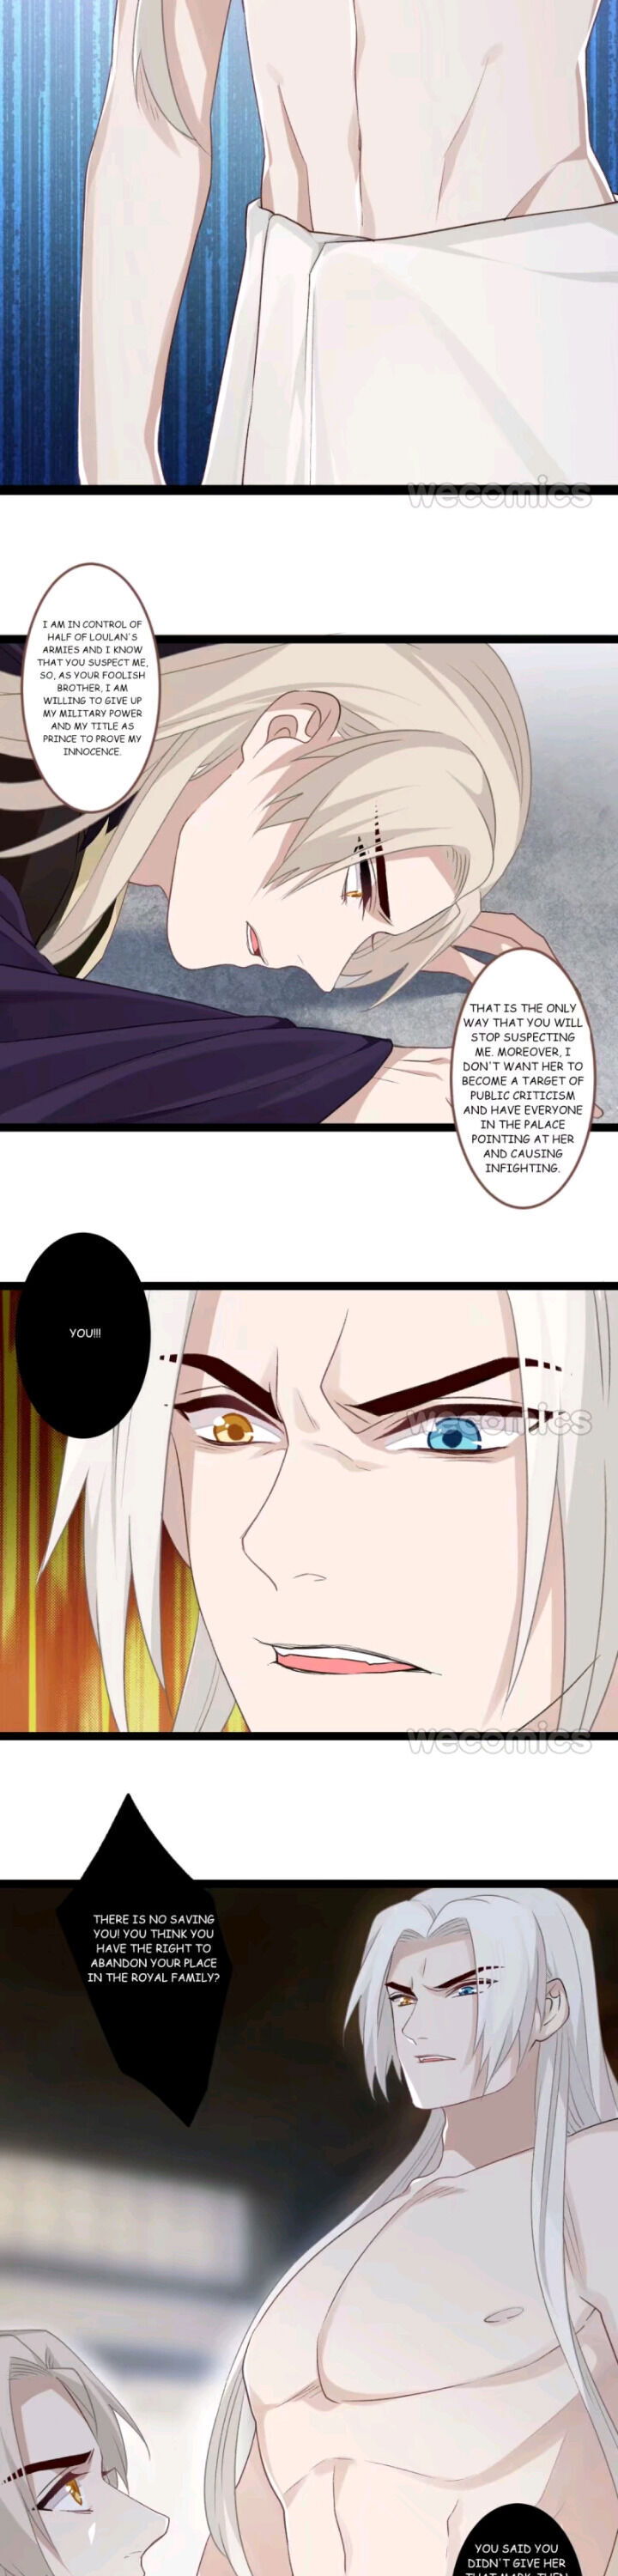 Curse of Loulan: The Tyrant Bestows Favor on Me Chapter 81 page 2